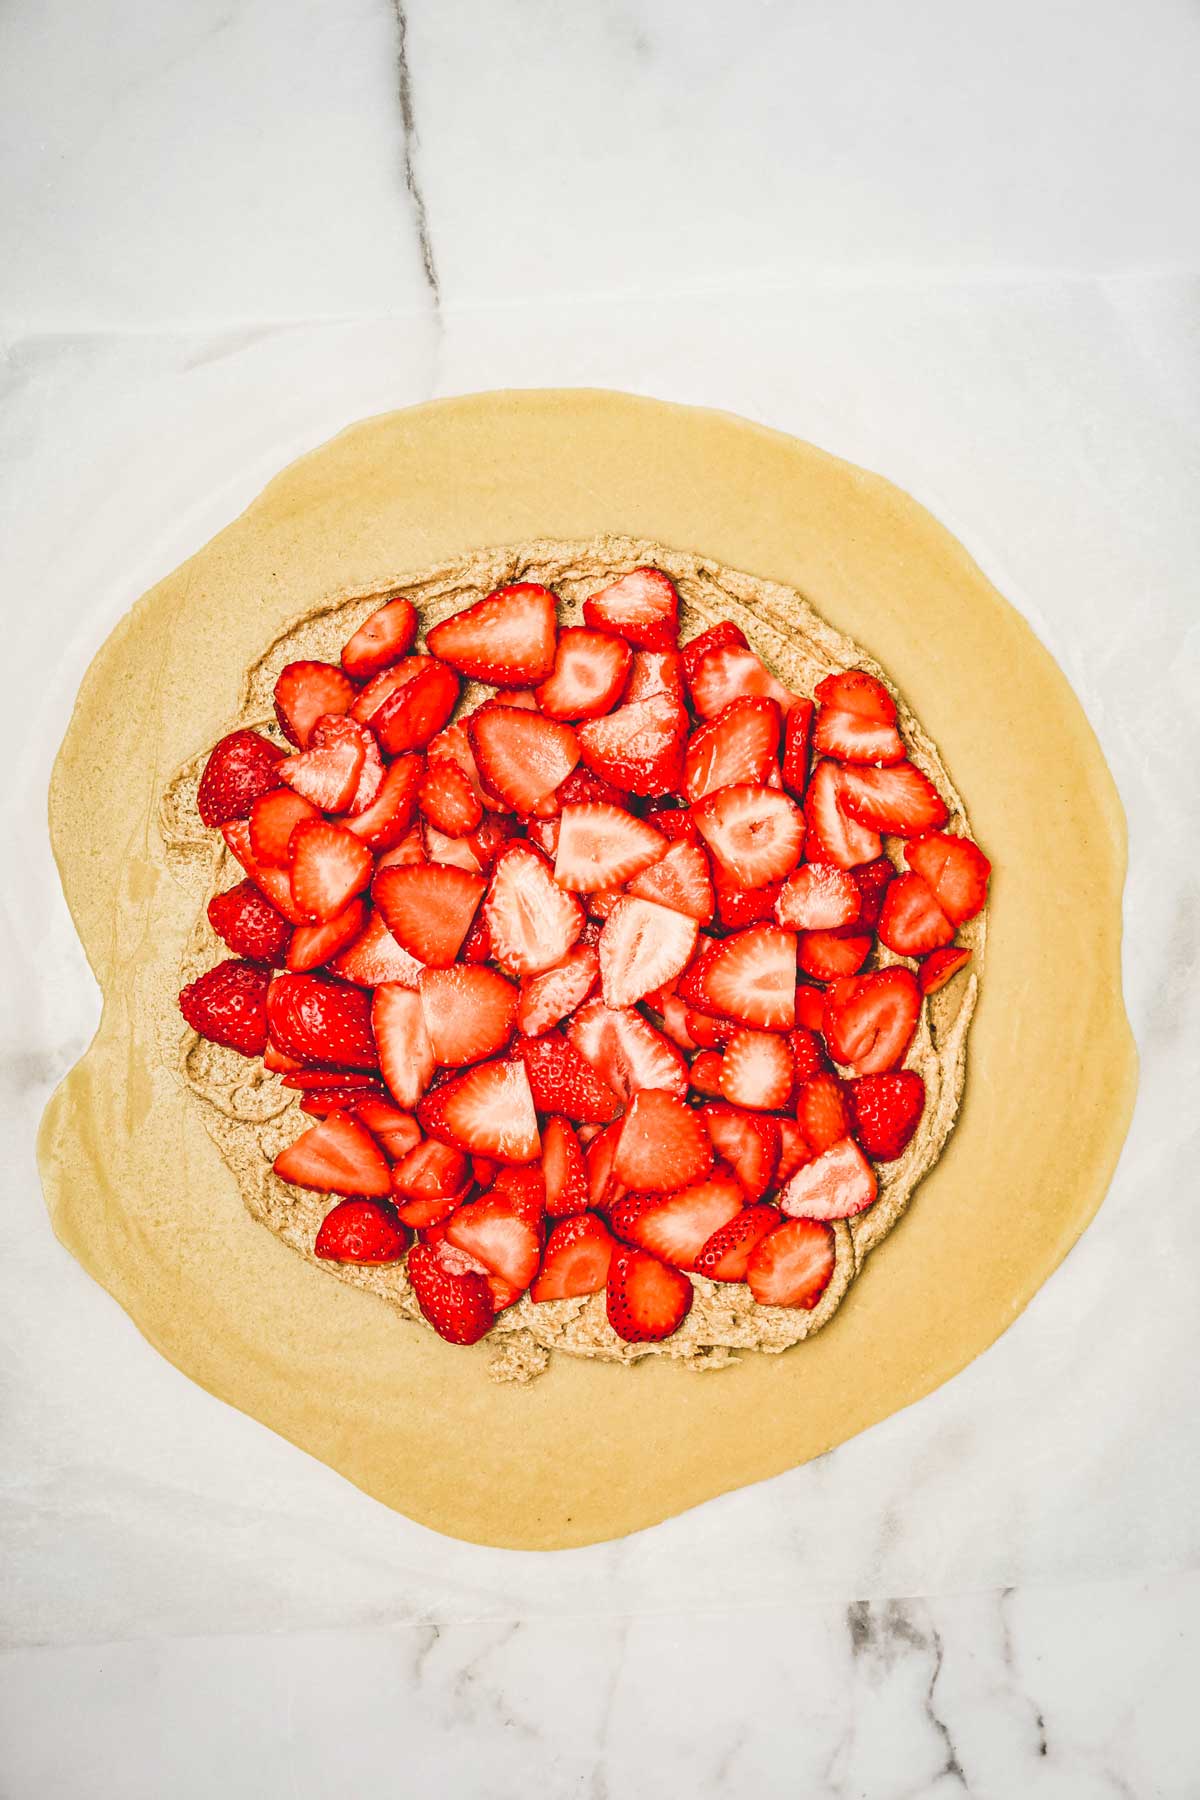 Set up of the rustic strawberry galette before baking